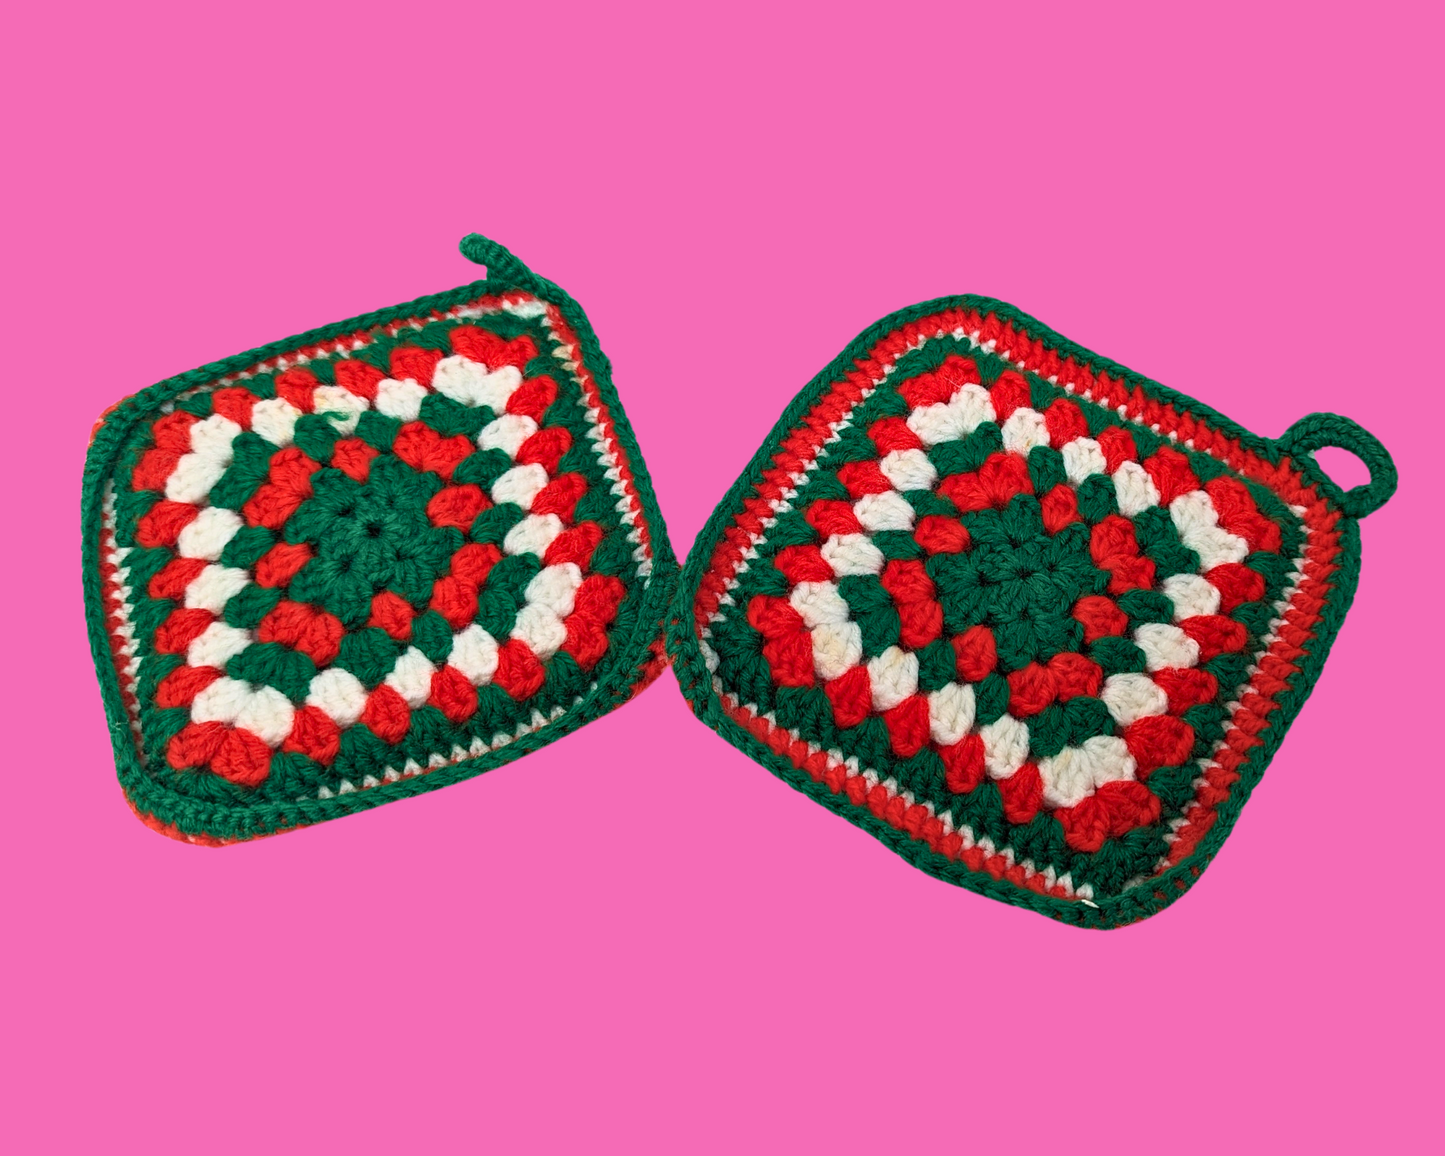 Vintage 1980's Hand Crocheted Oven Mitts